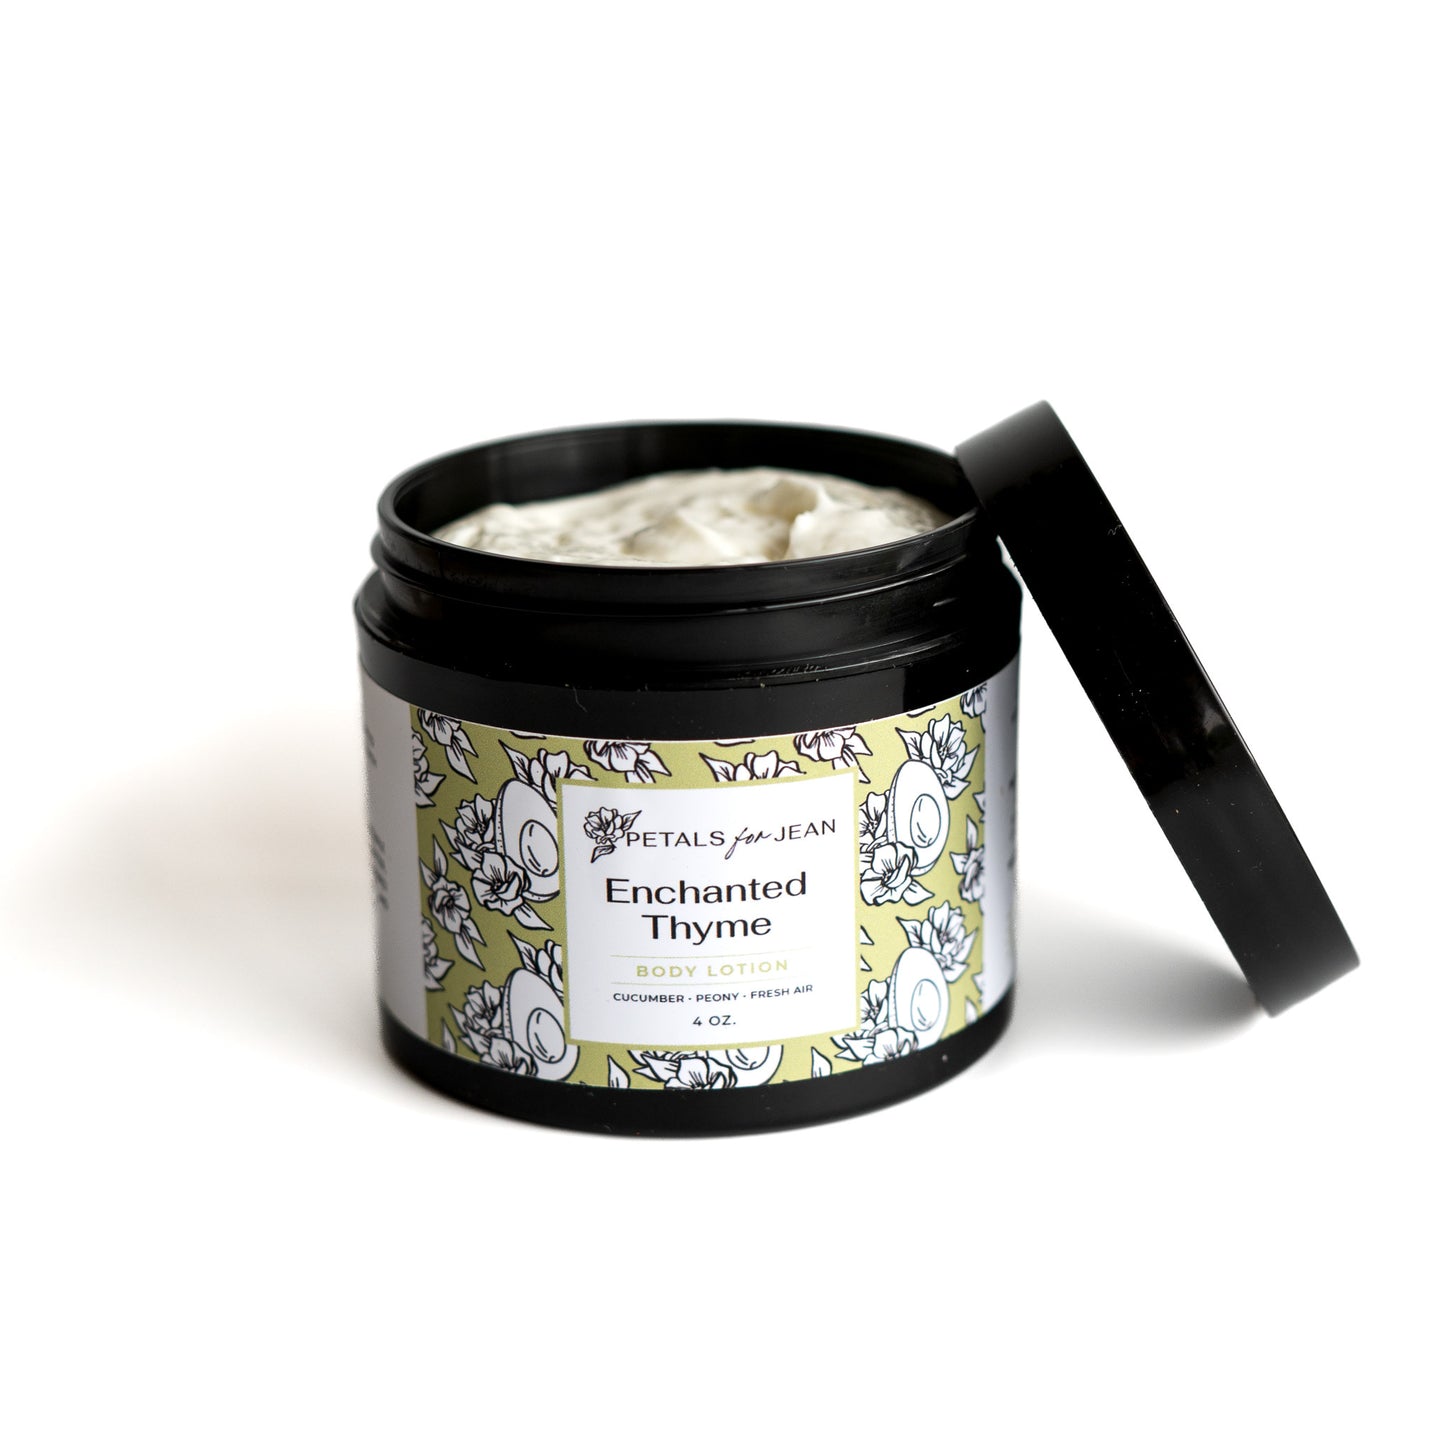 Enchanted Thyme - Body Lotion